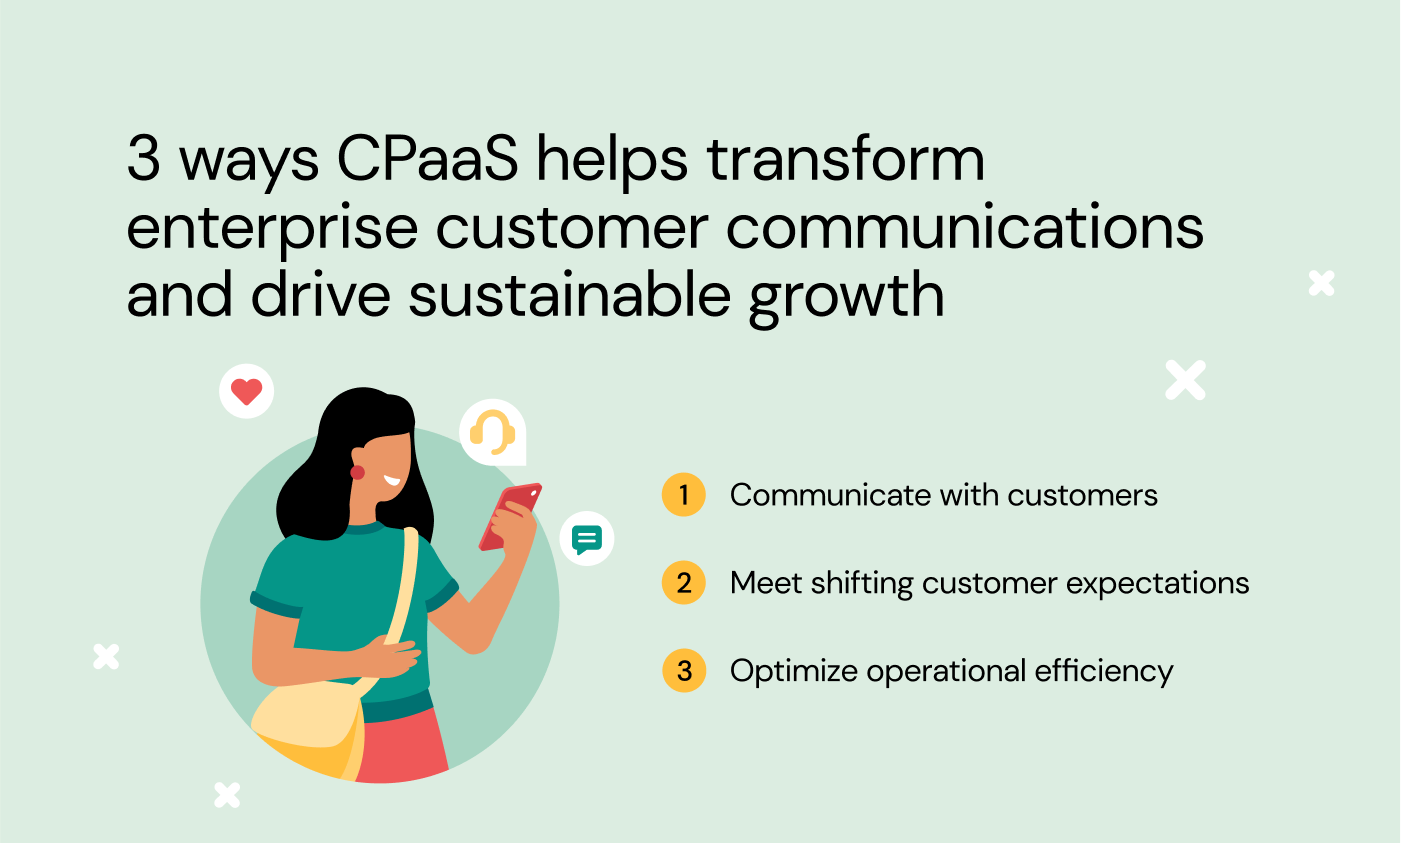 Image showing the 3 ways CPaaS helps transform communications and growth